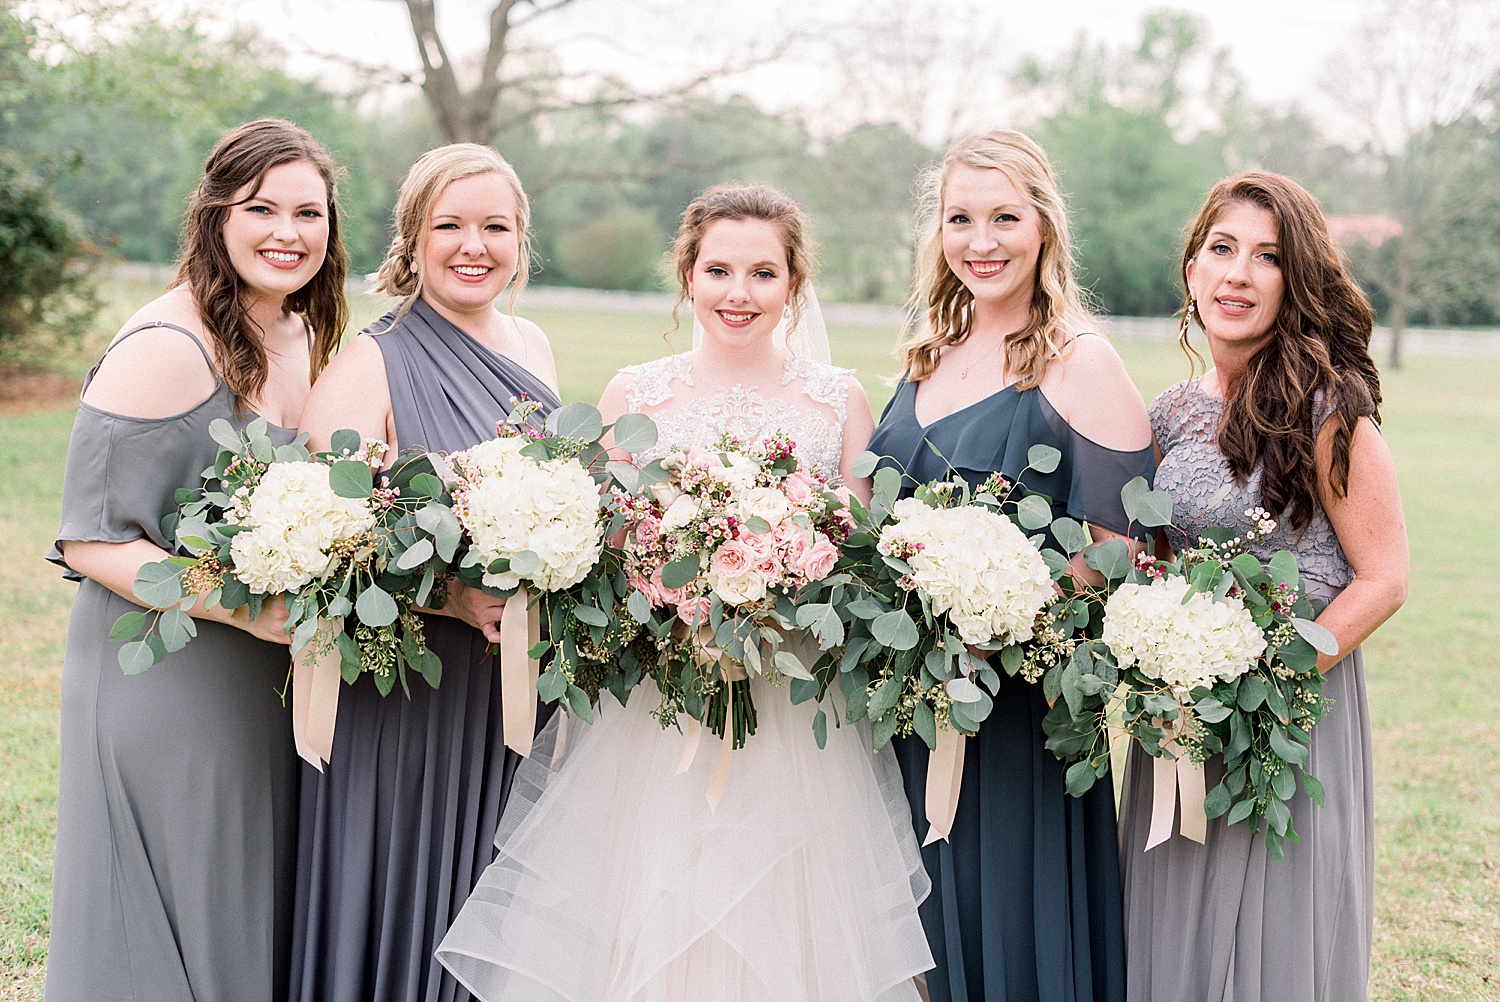 bride and bridesmaids in dark grey hold their wedding bouquets together before AL wedding ceremony